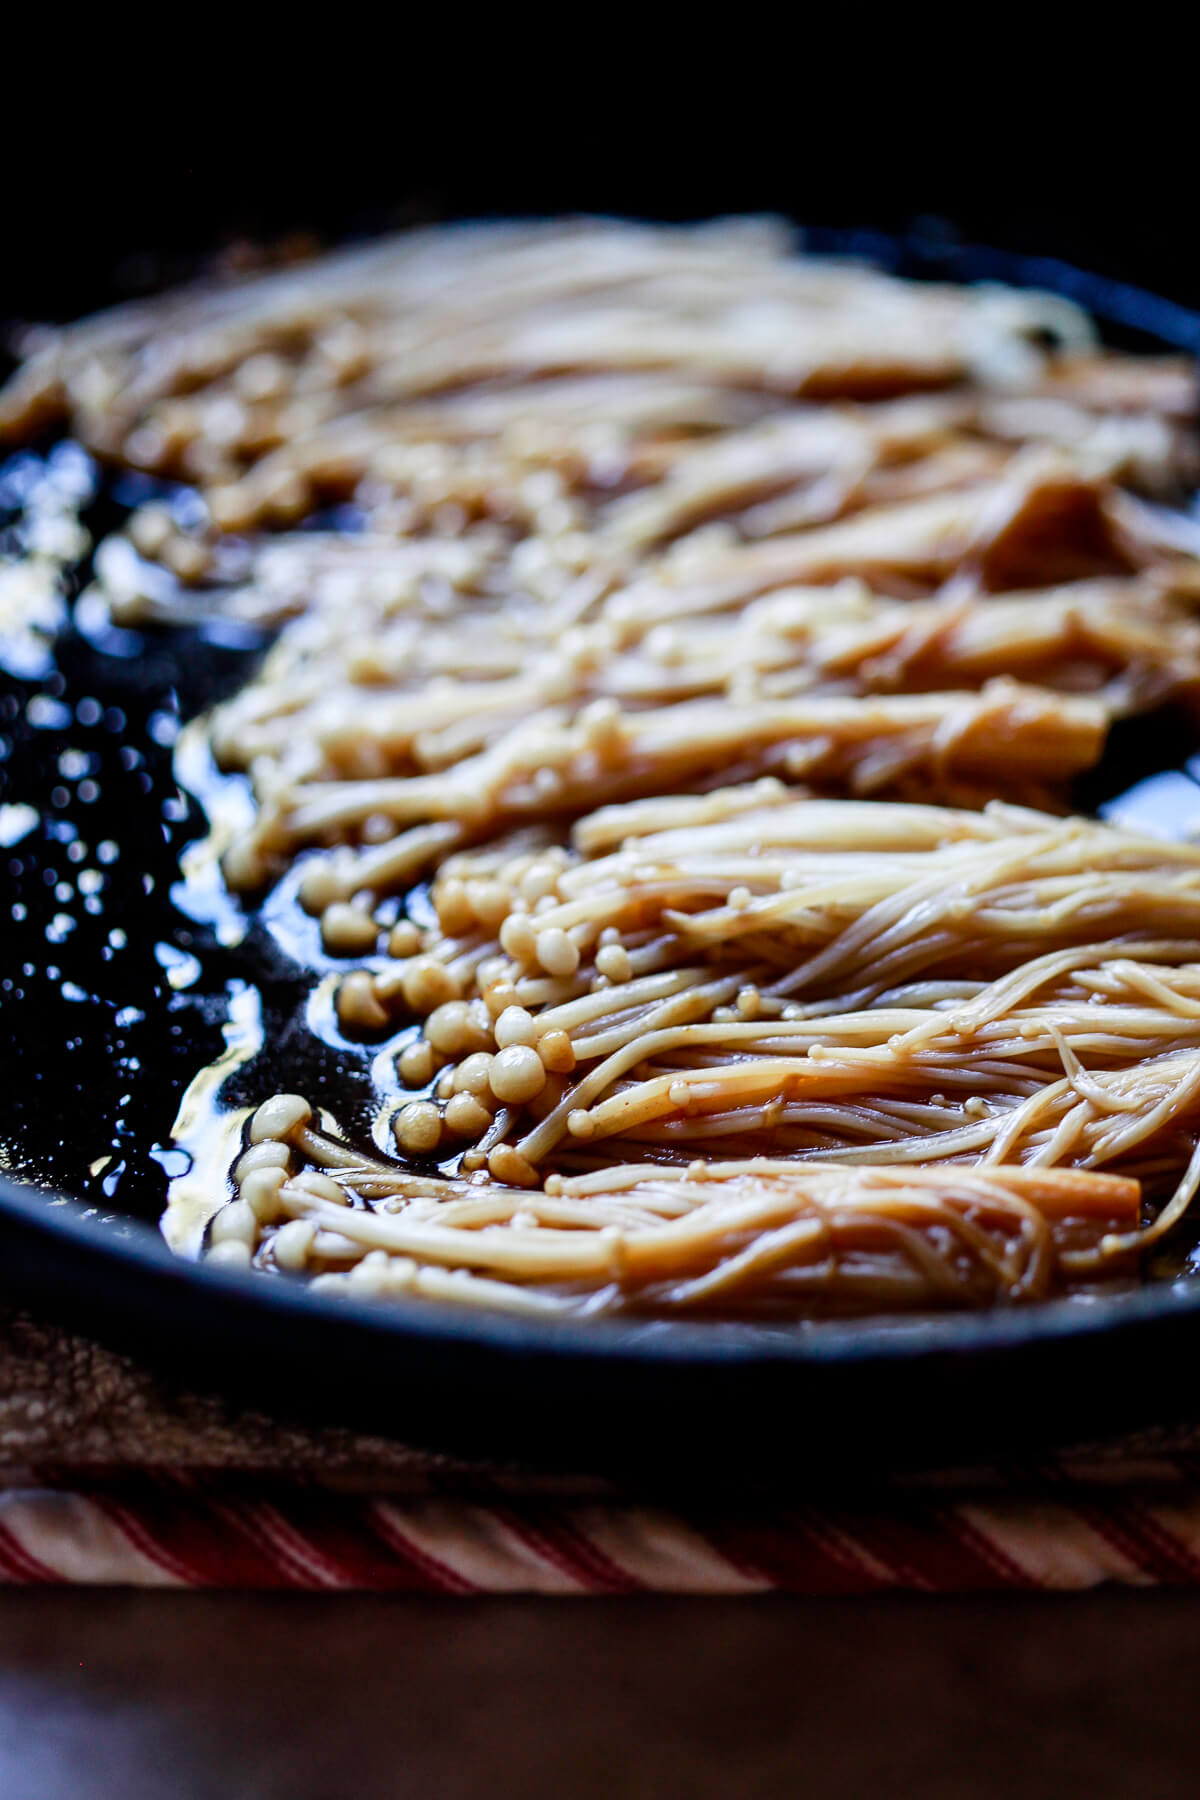 Enoki mushrooms cook in soy sauce and teriyaki sauce in a cast iron skillet.